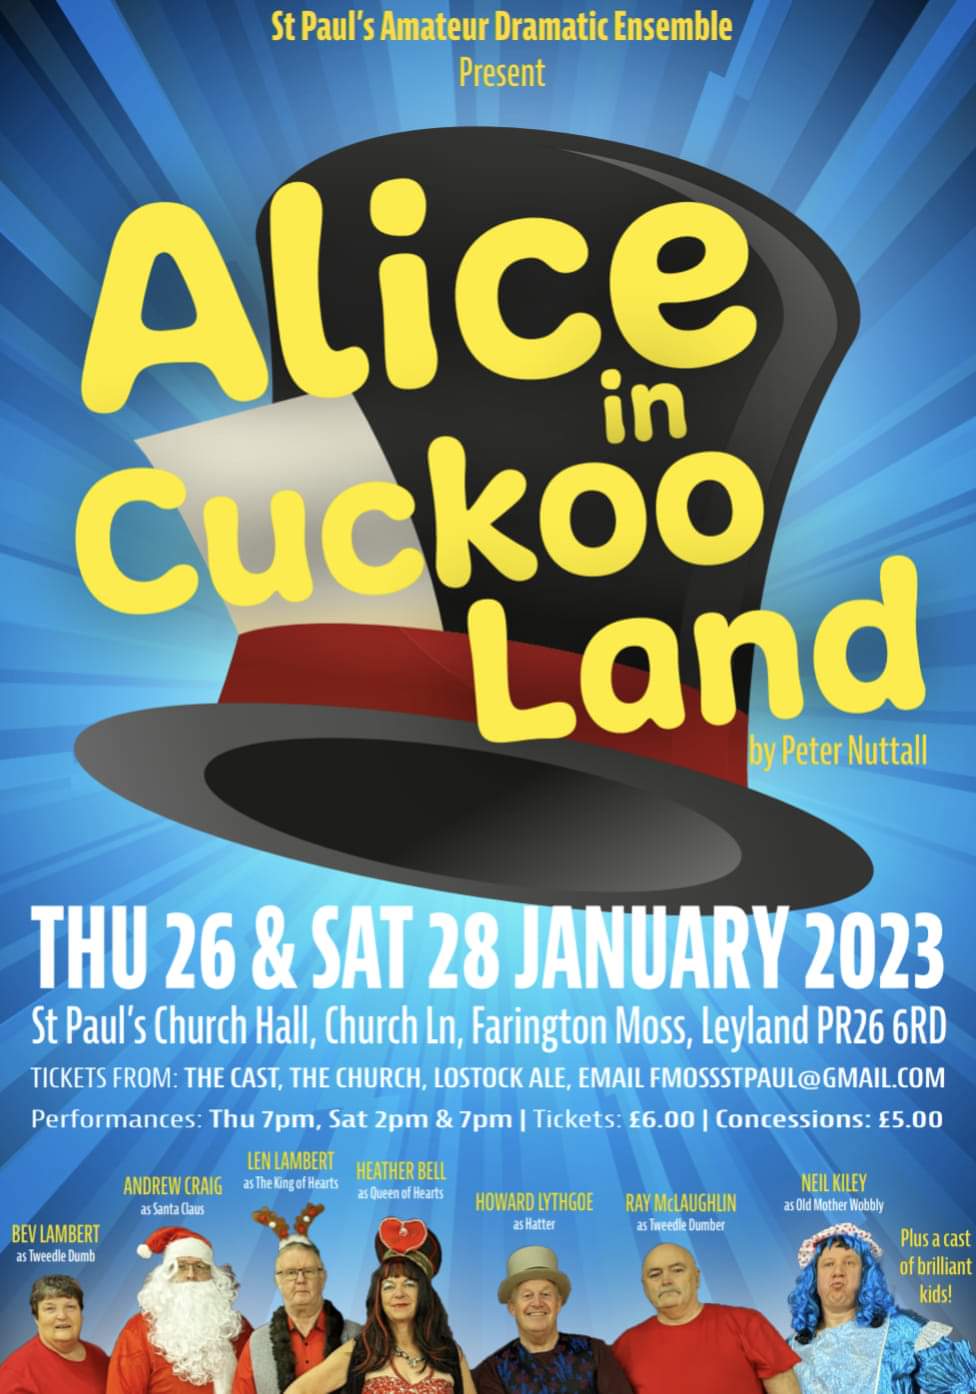 Alice in Cuckoo Land (by Peter Nuttall)